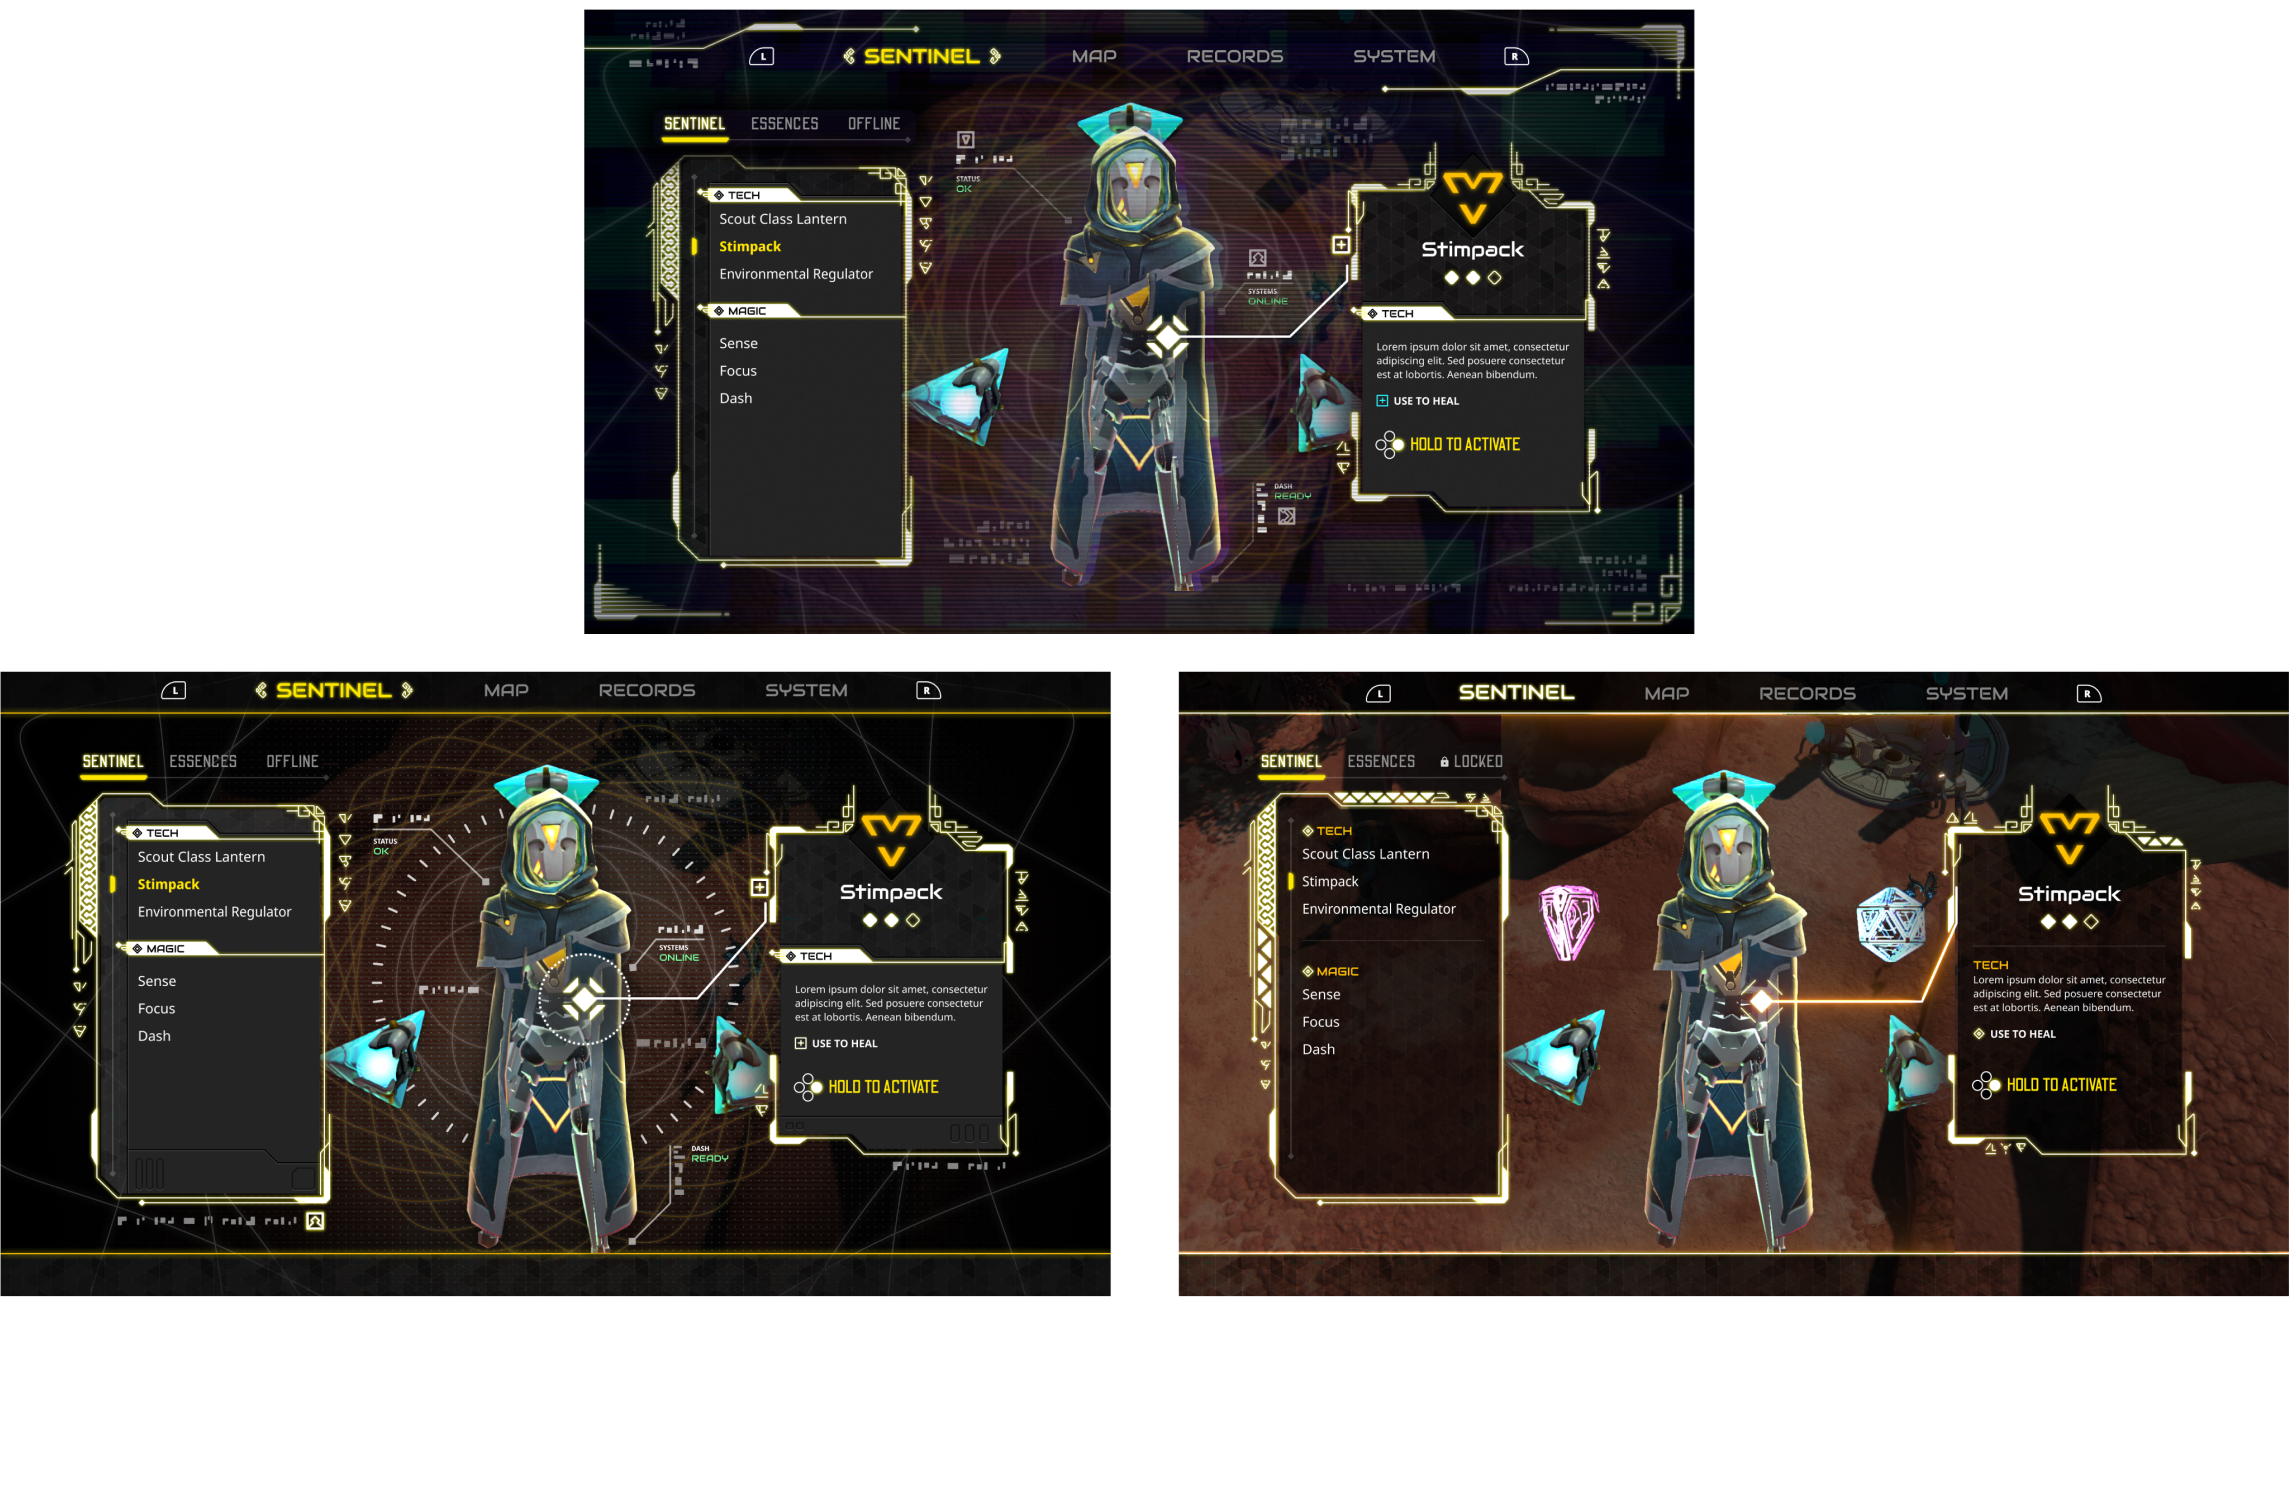 Early UI concepts for Reliquary game